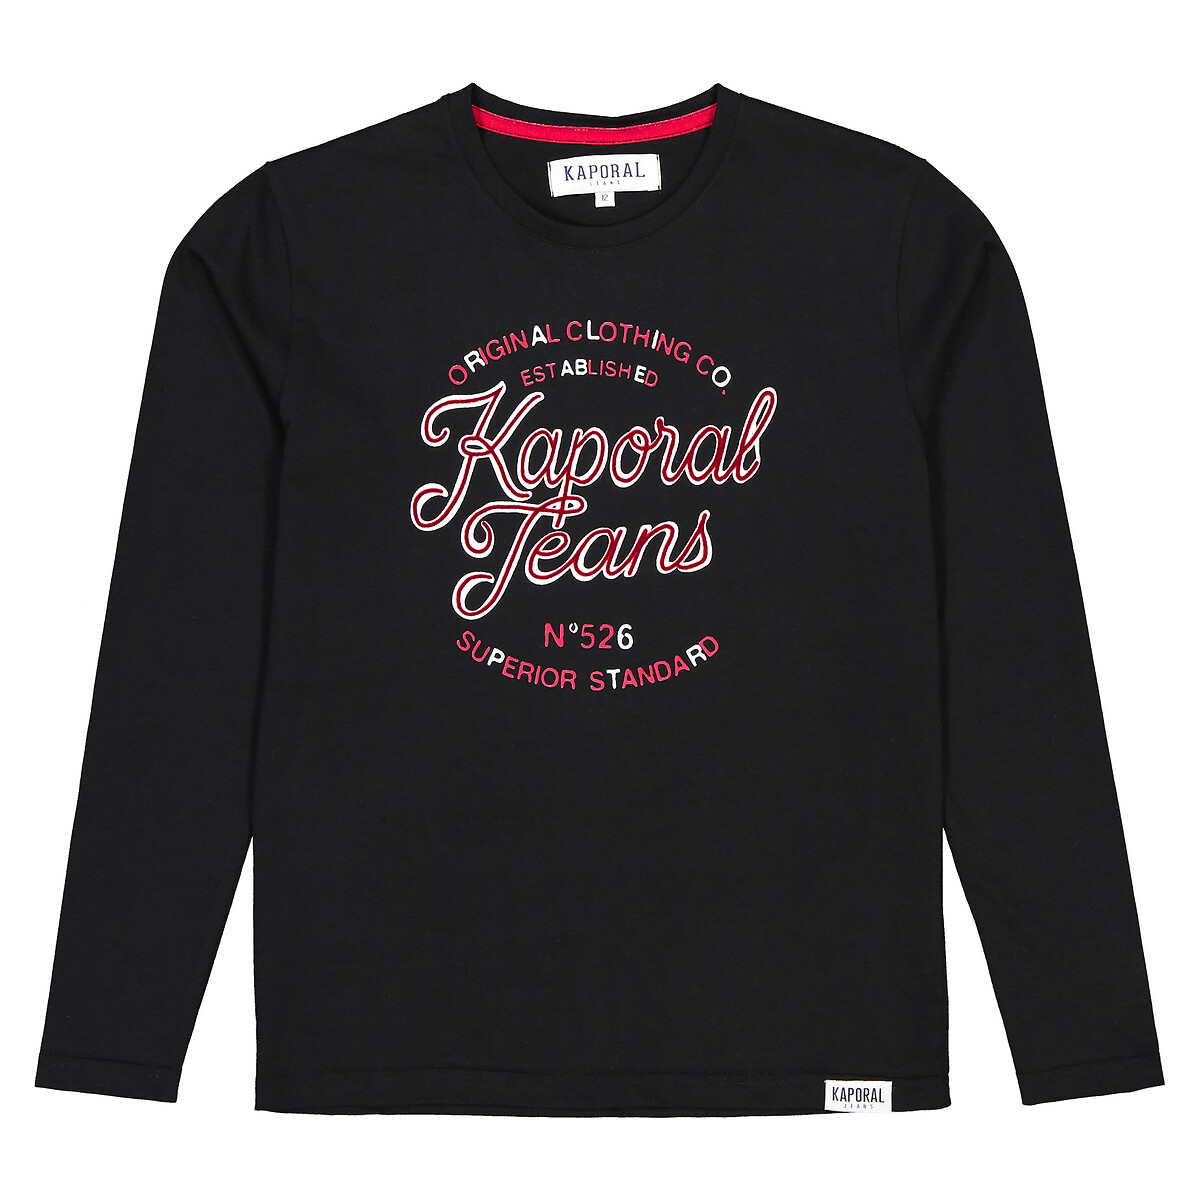 Cotton Long-Sleeved T-Shirt, 10-16 Years